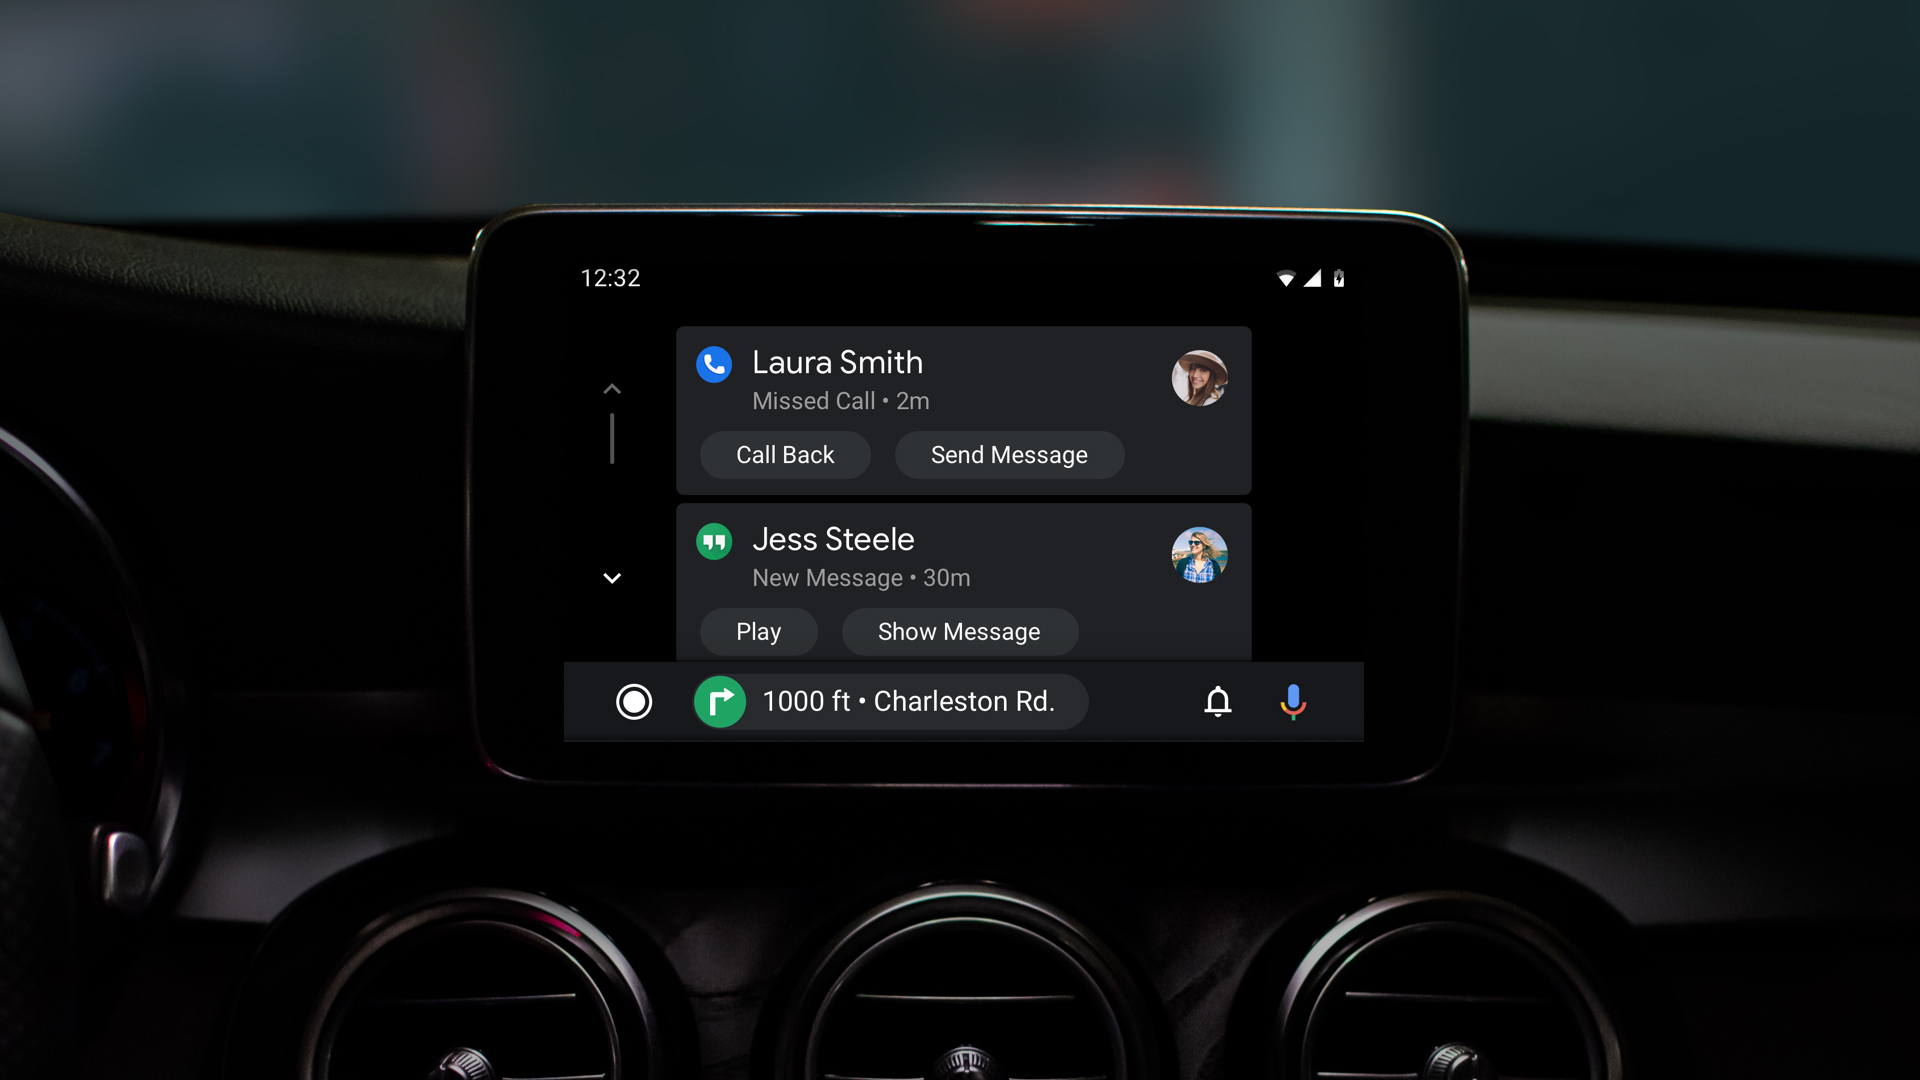 Android Auto's new interface, featuring dark mode, is rolling out from